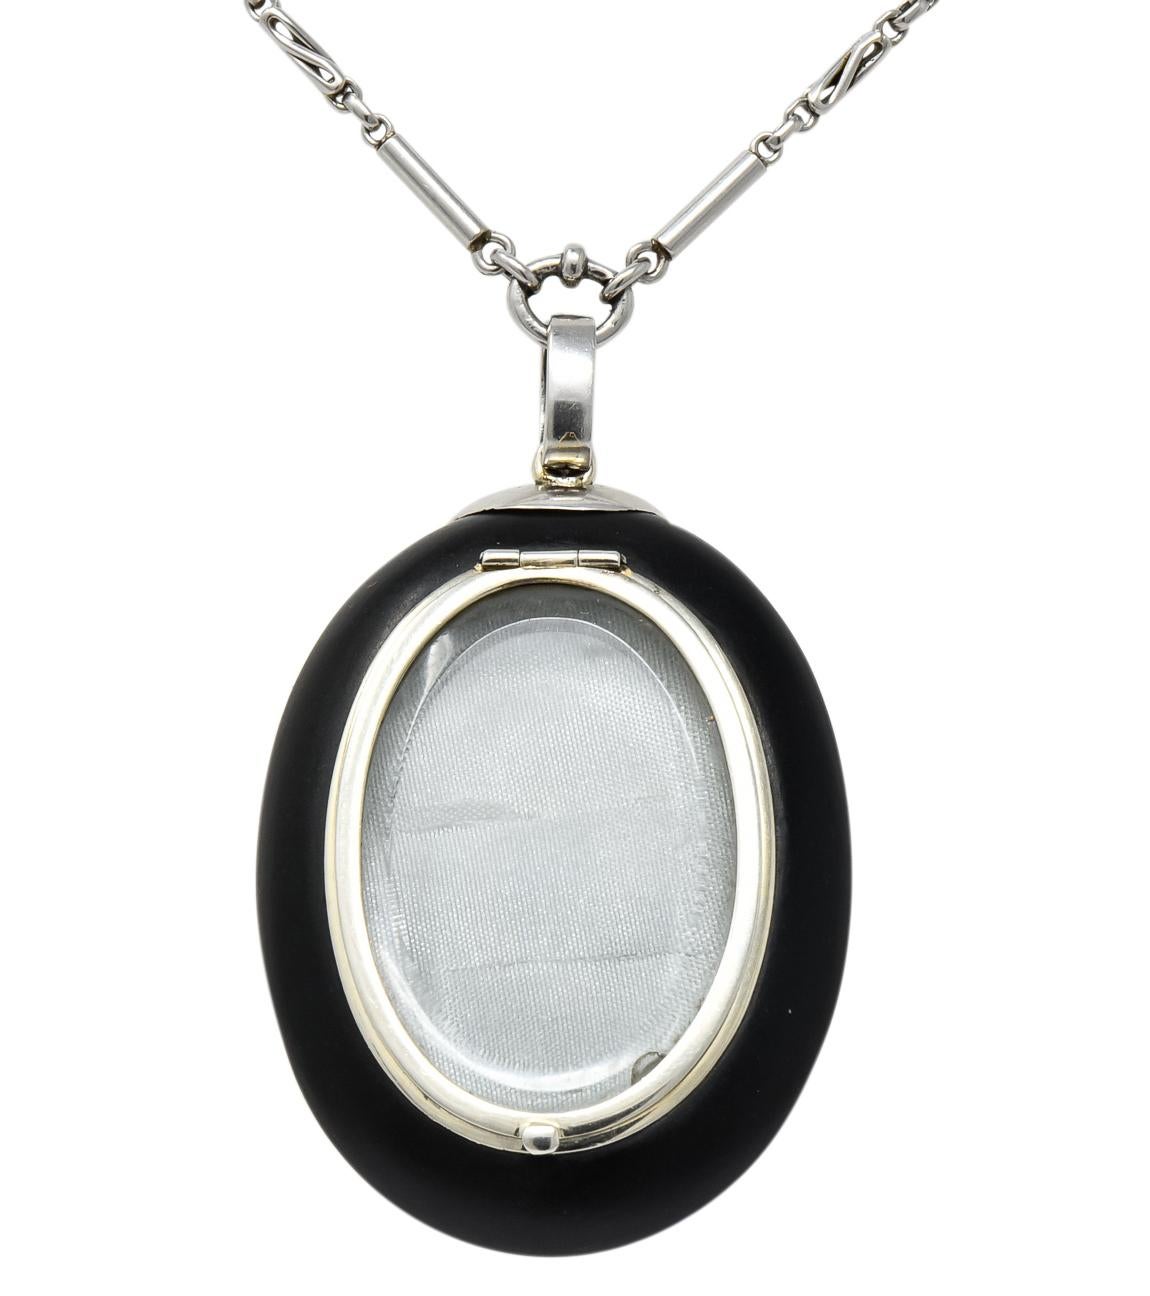 Centering a round natural pearl measuring 6.0 mm, white in body color with silver overtones and good luster

Surrounded by hollow, oval cabochon onyx measuring approximately 1 5/8 x 1 3/16 inches, opaque and matte black in color

Back of onyx has